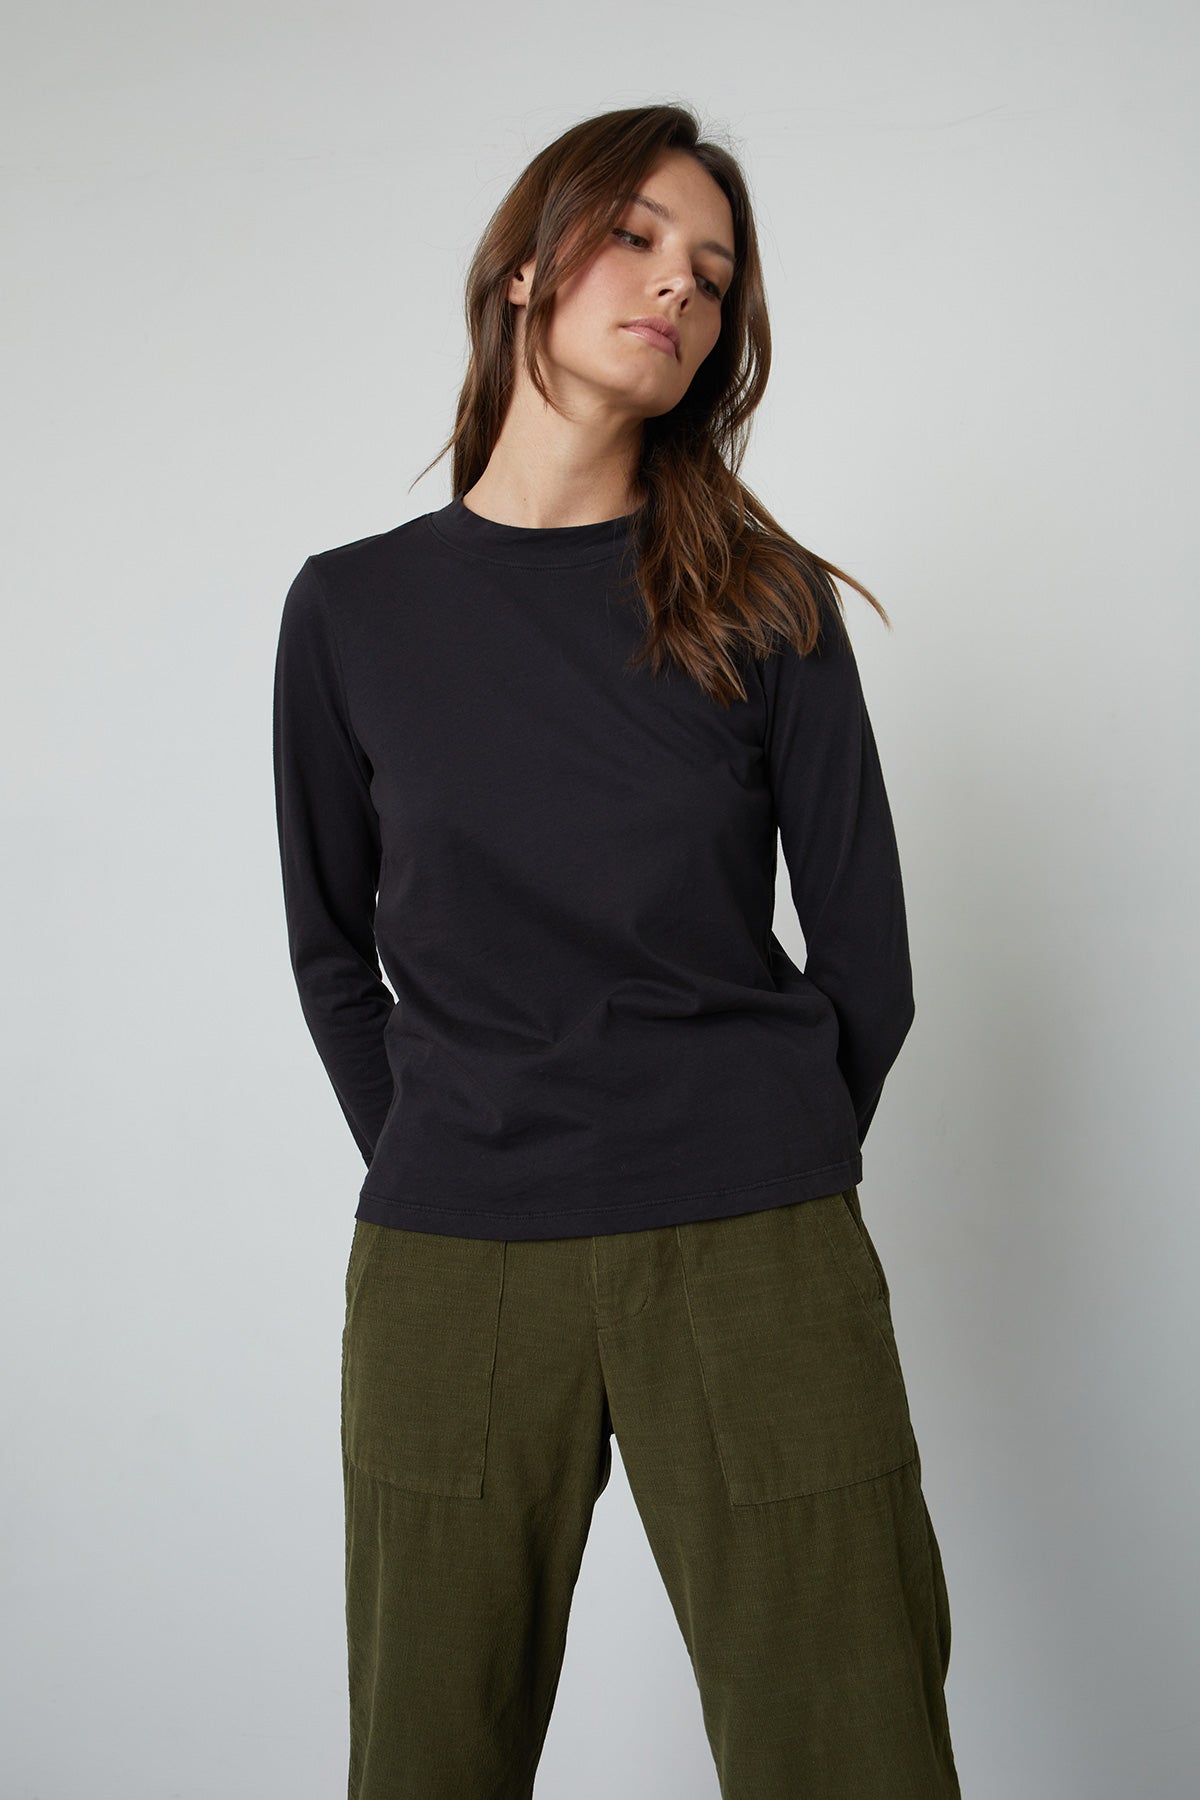   Quinny 3/4 Sleeve Mock Neck Tee in black with Vera Pant in Aloe  front view 